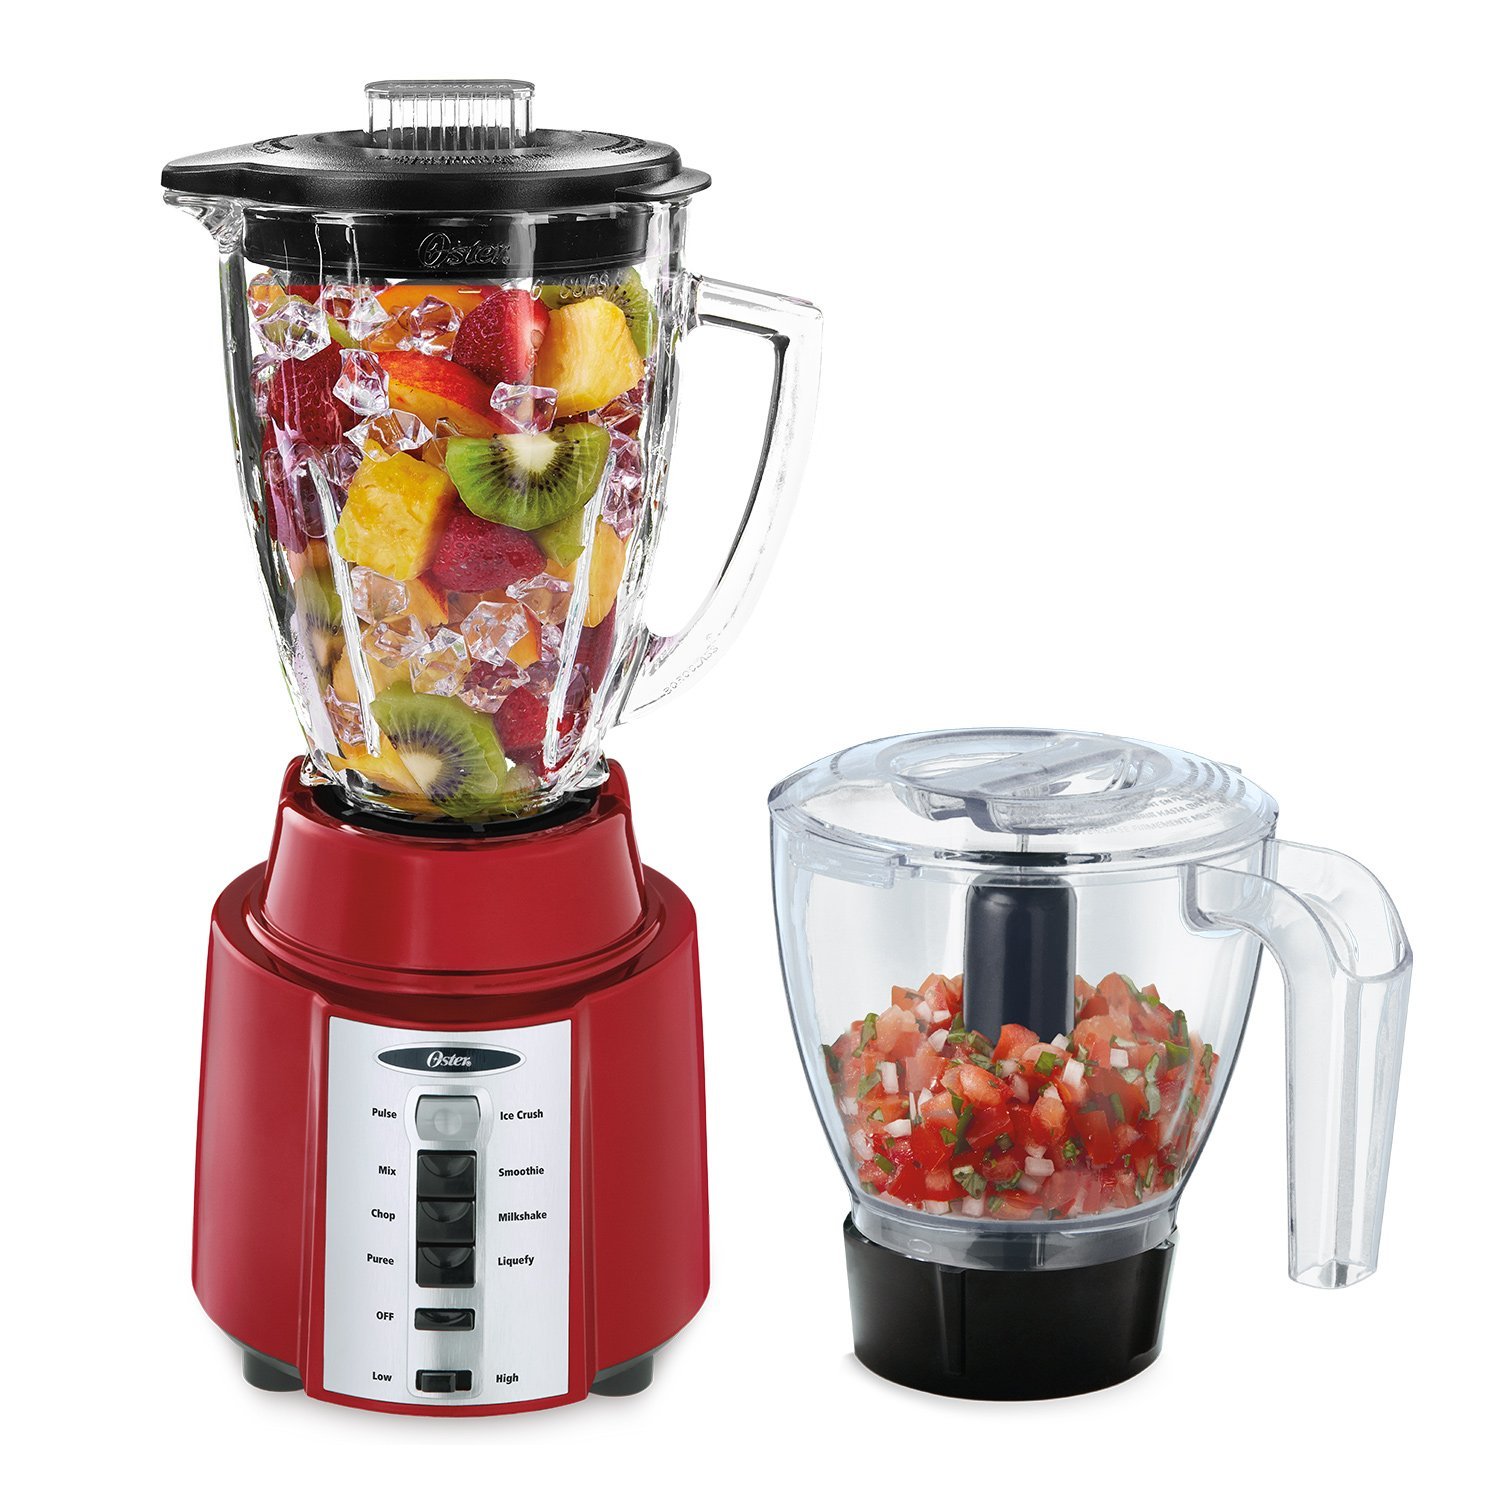 Oster Rapid Blend 8-Speed Blender with Glass Jar and Bonus 3-Cup Food Processor – Just $36.20!